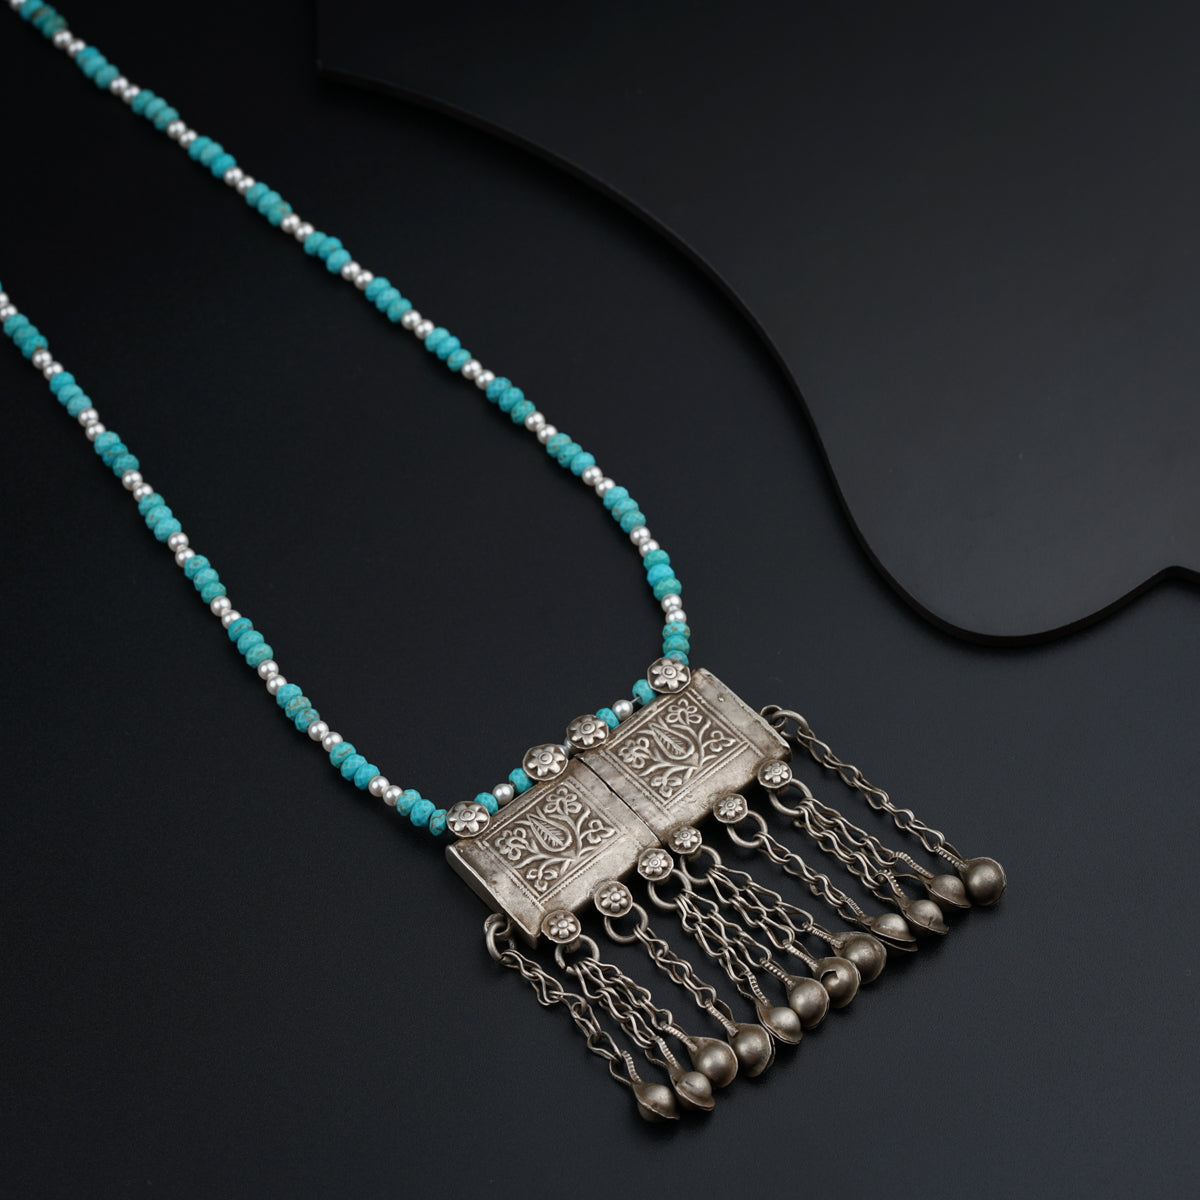 Necklace with Antique Silver Pendant